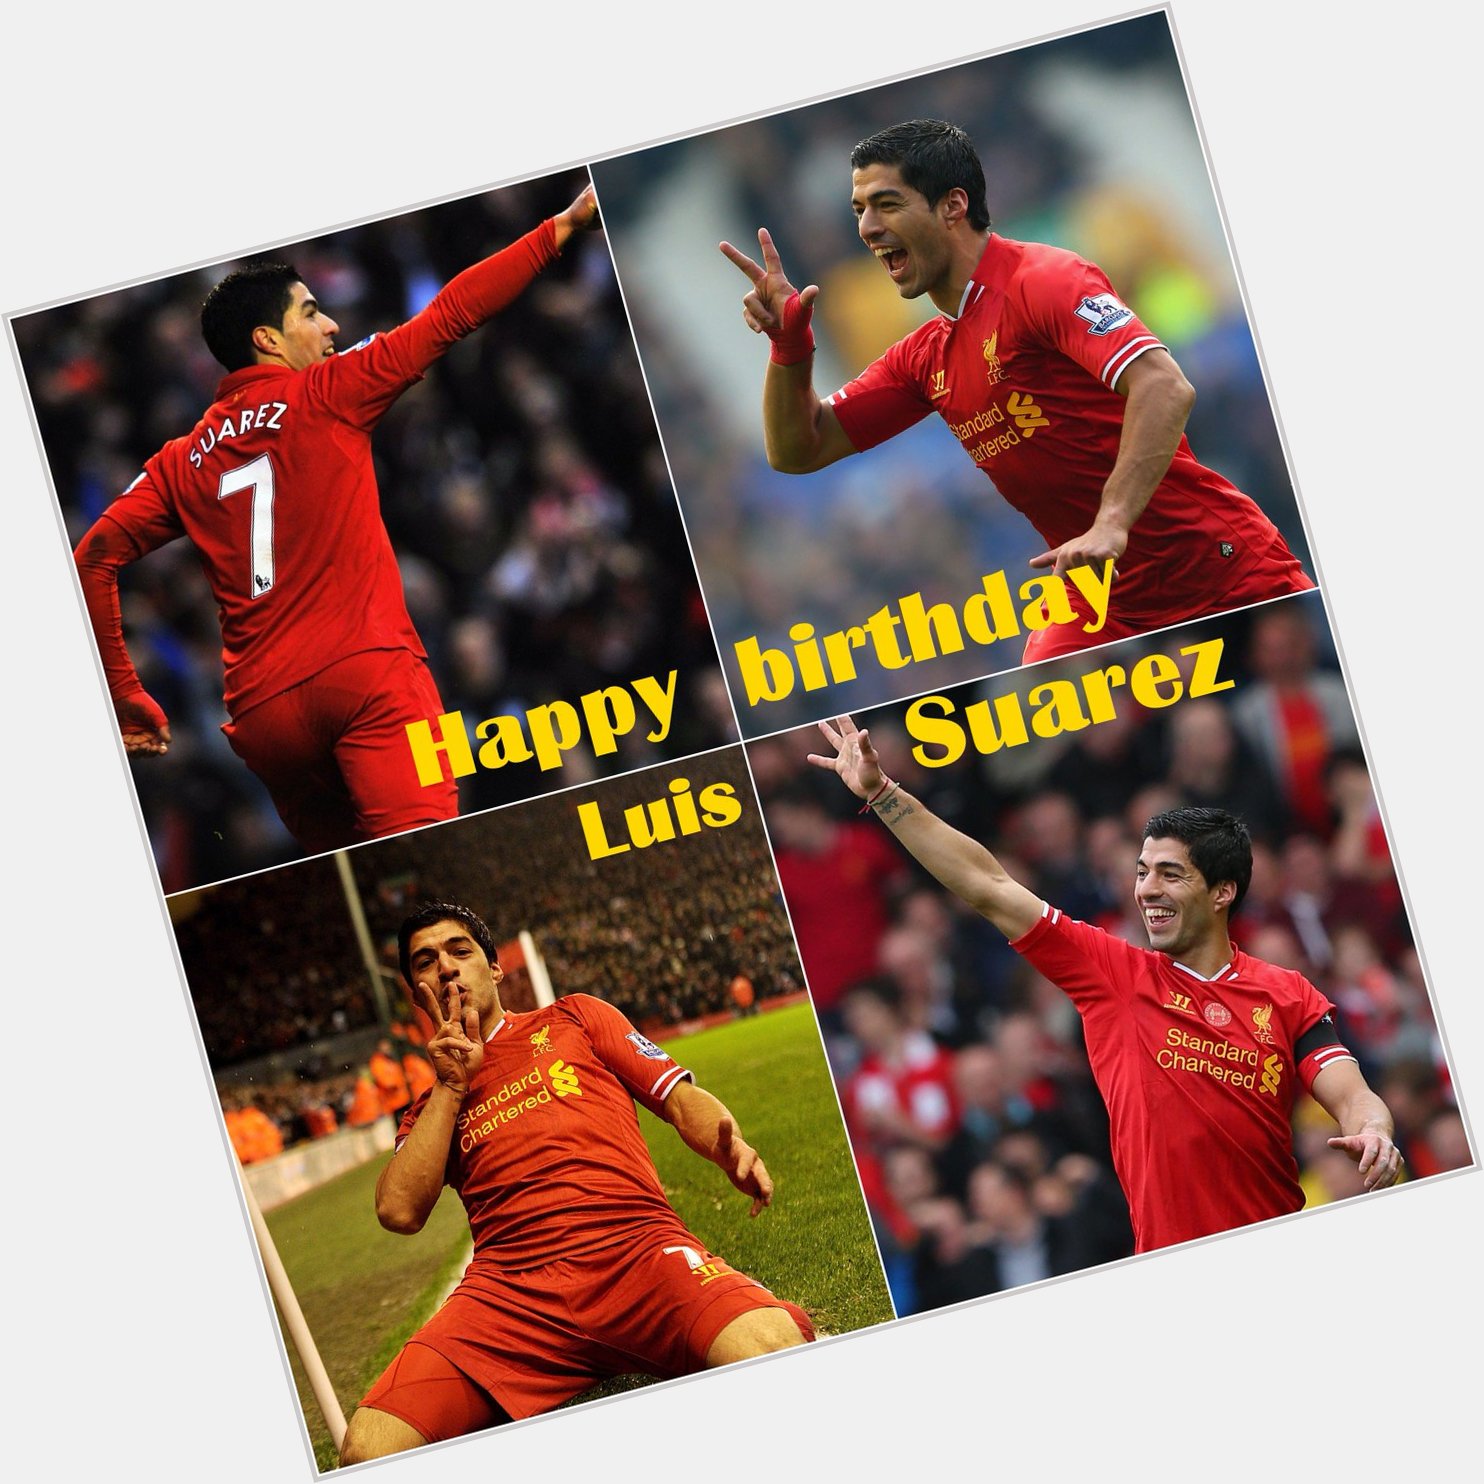 Happy birthday, one of the best strikers ever!
Luis Suarez turns 30 today!  